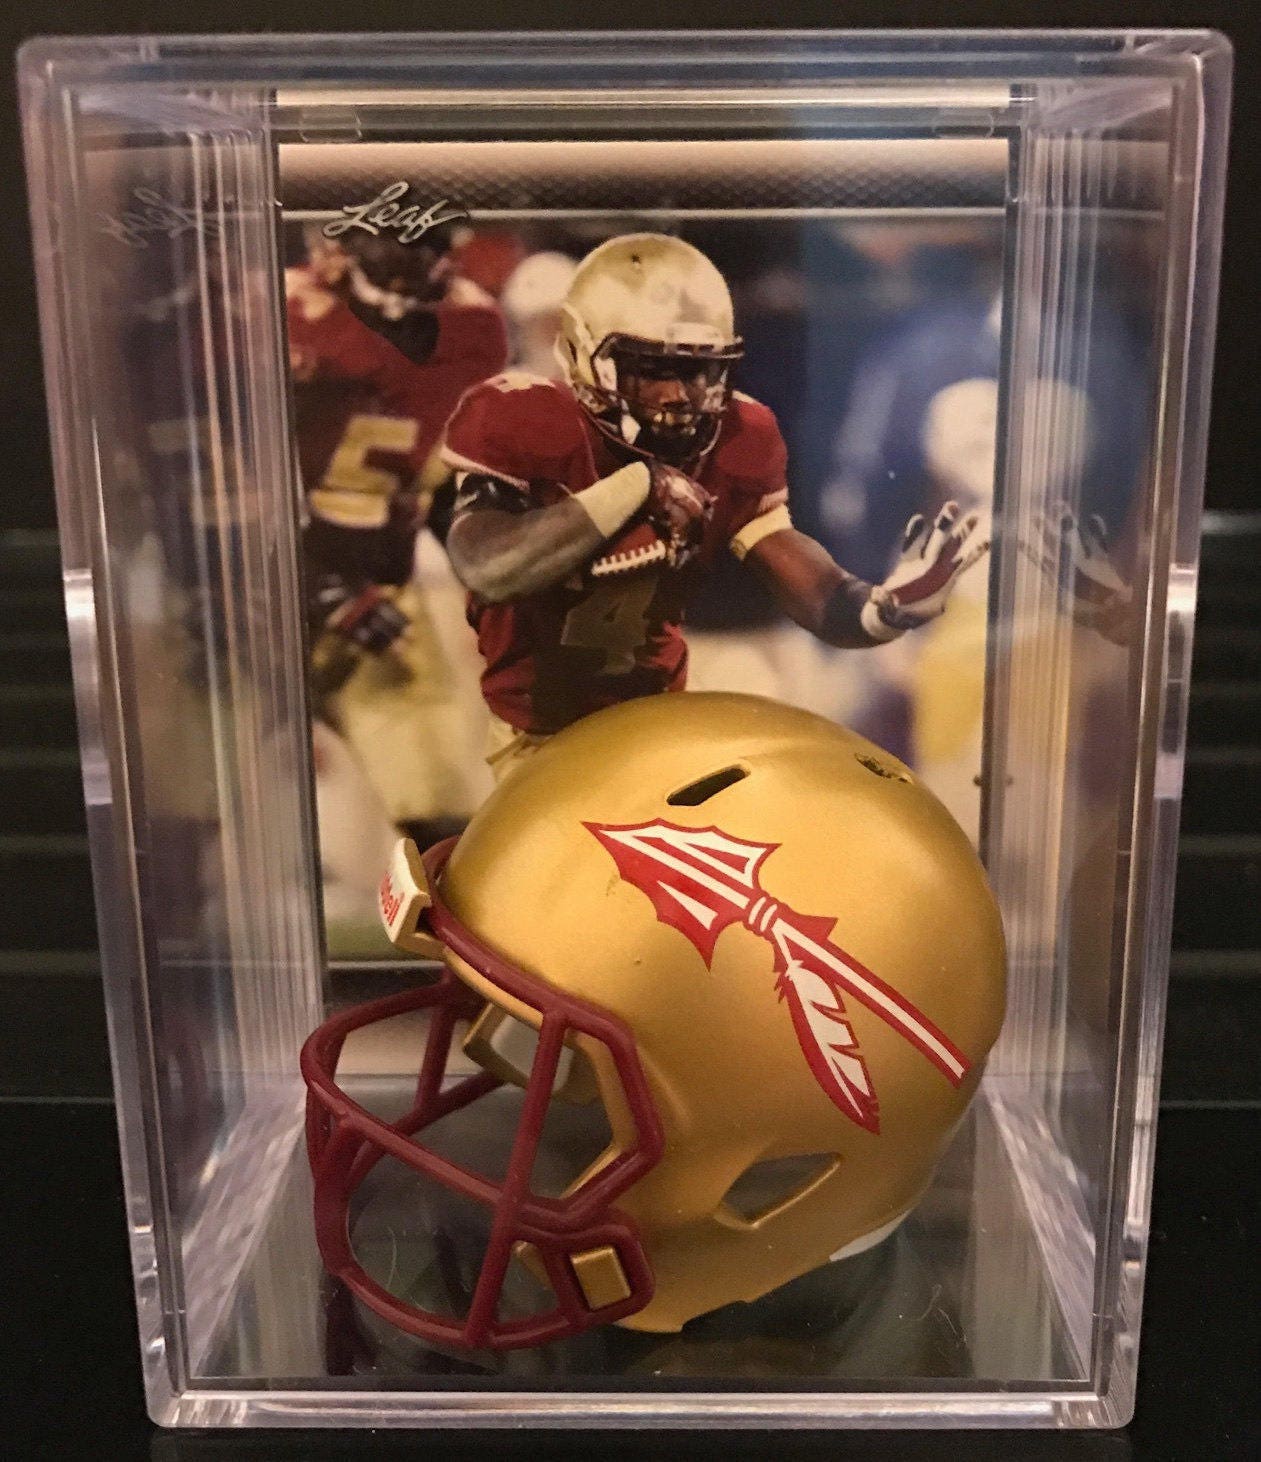 Hover Helmets Florida State Seminoles NCAA New in Box Great Gift Idea 